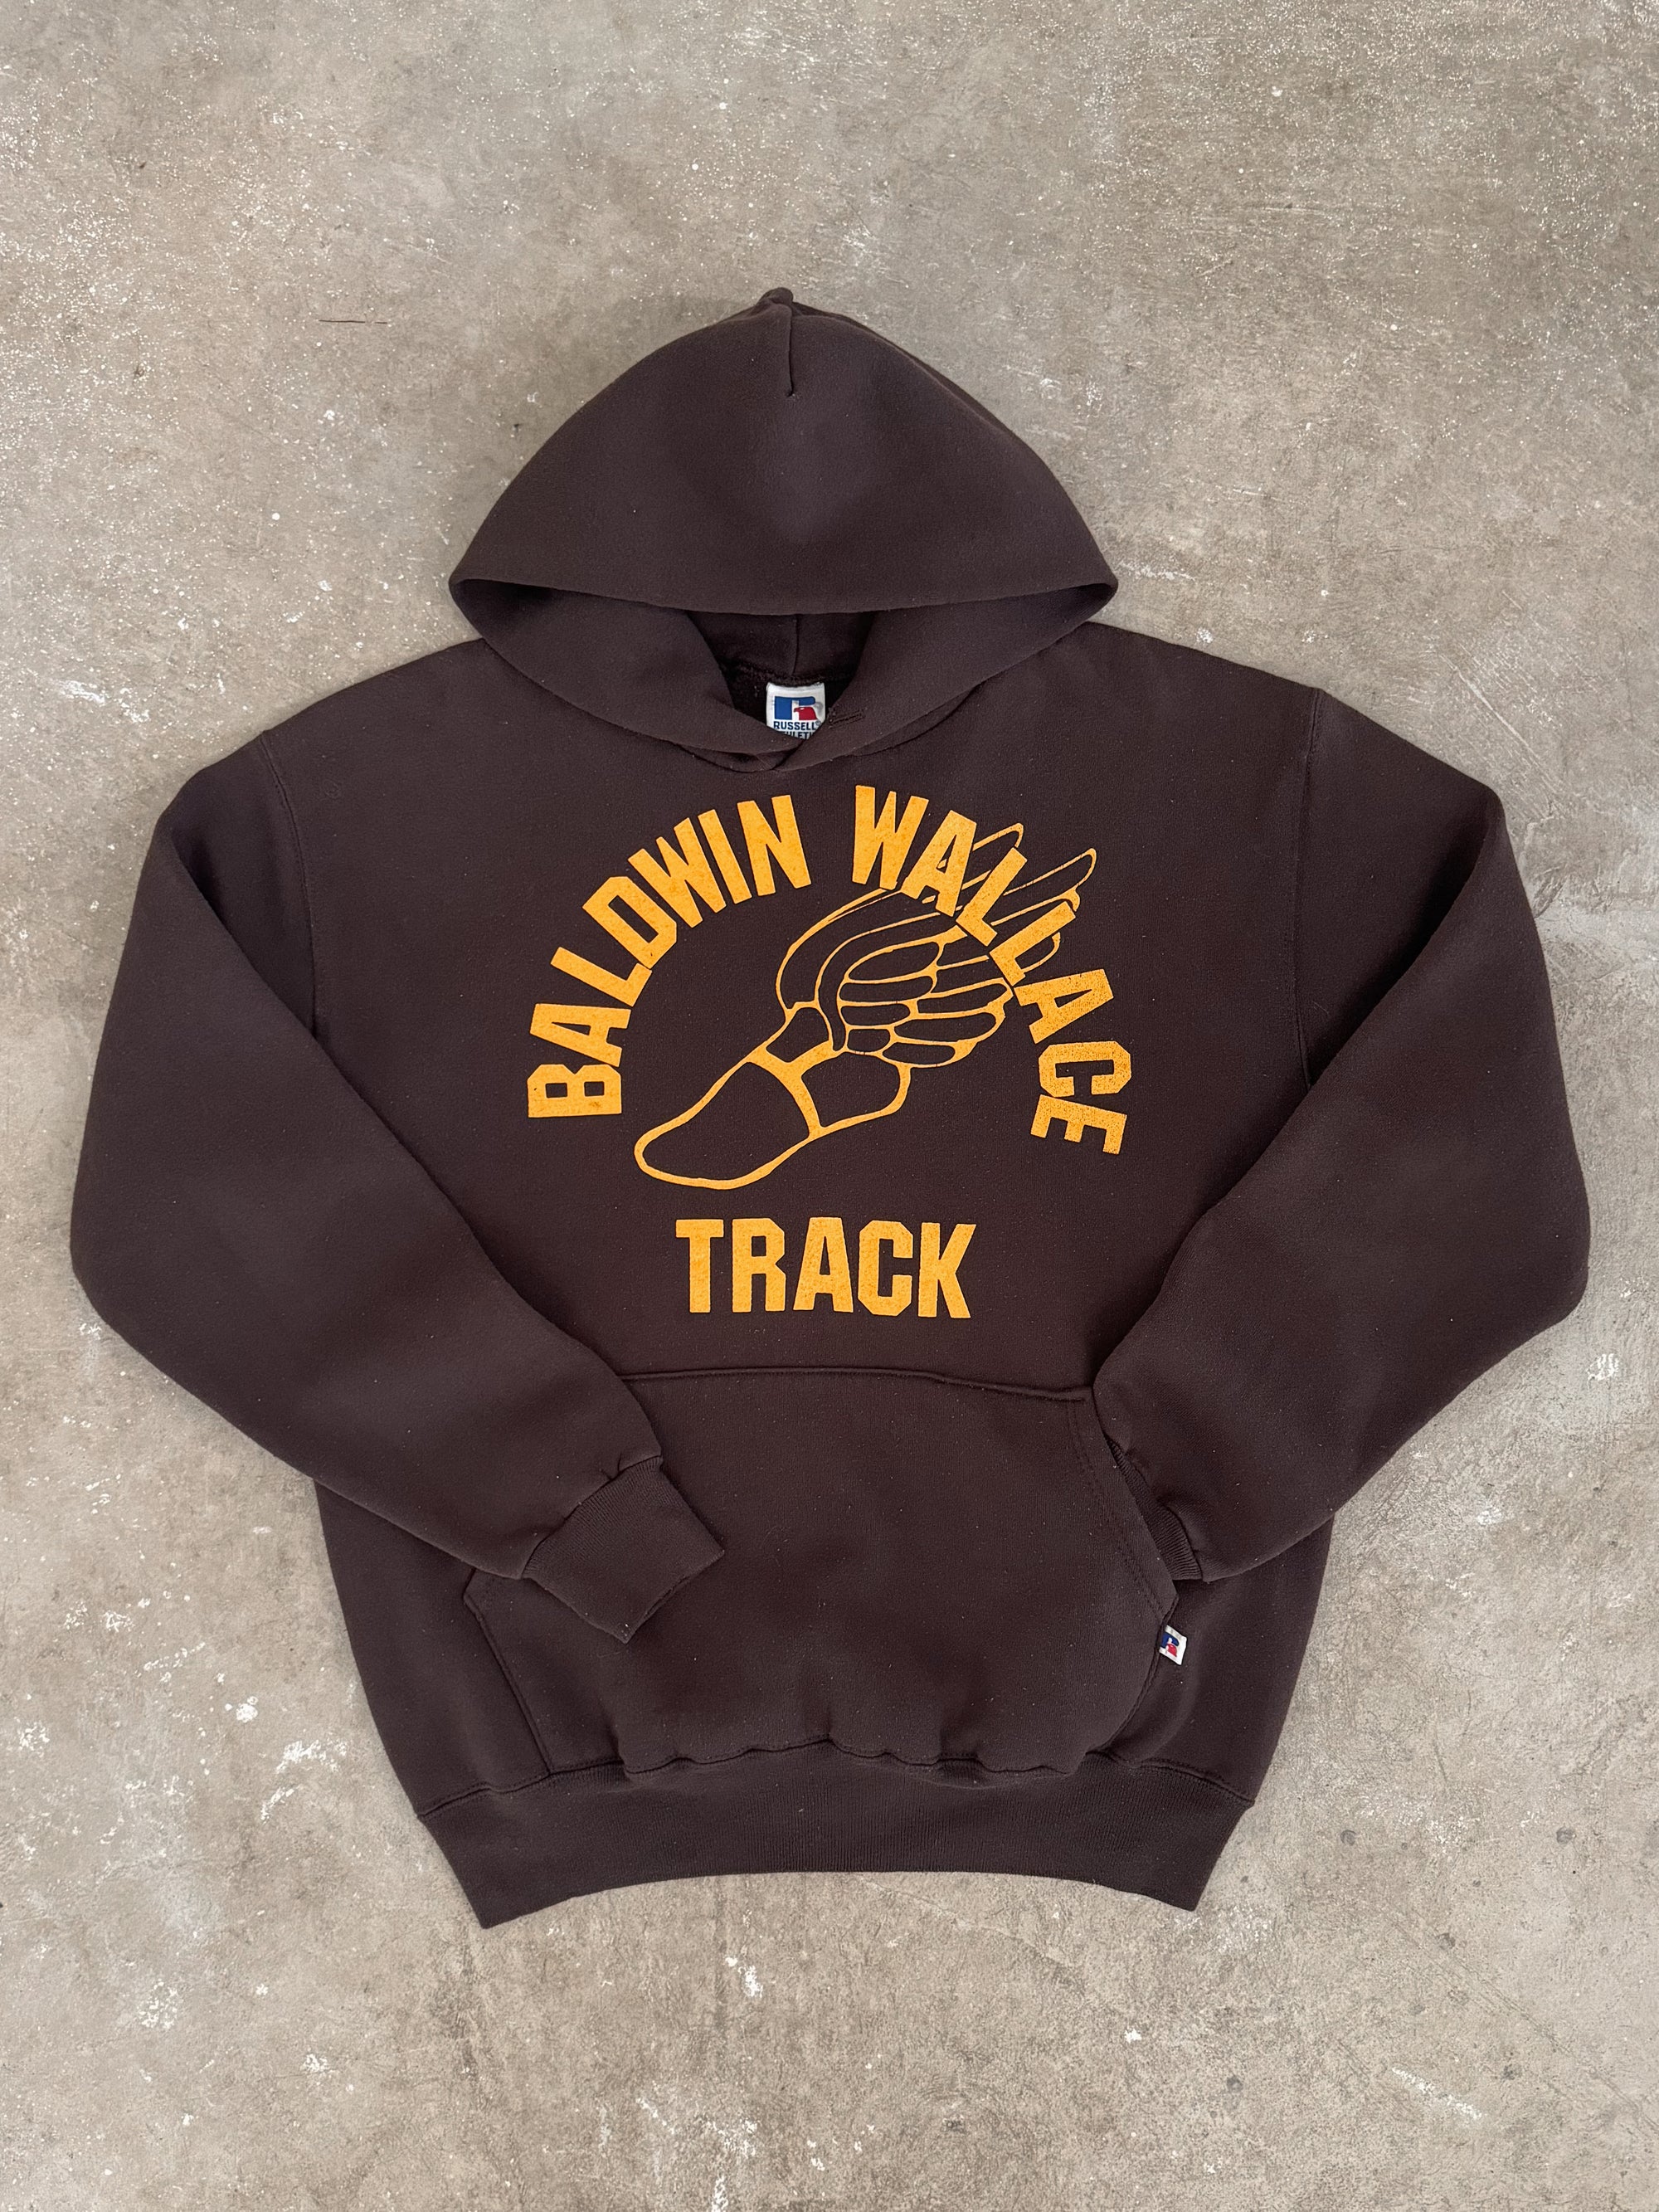 1990s Russell "Baldwin Wallace Track" Hoodie (M)